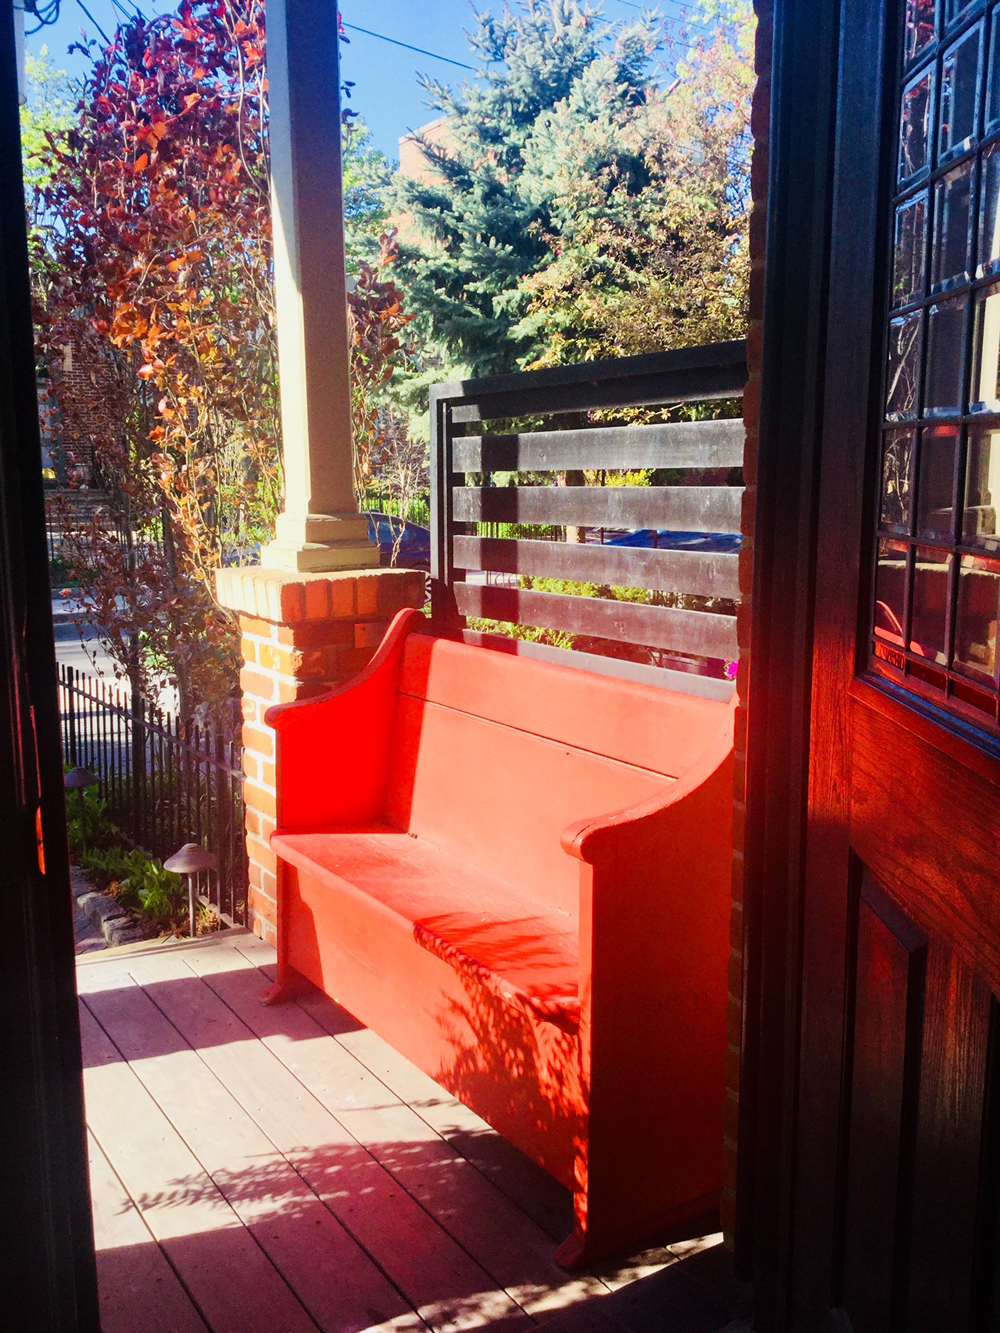 An old church pew on a tiny front porch painted a cheery bright orange-red